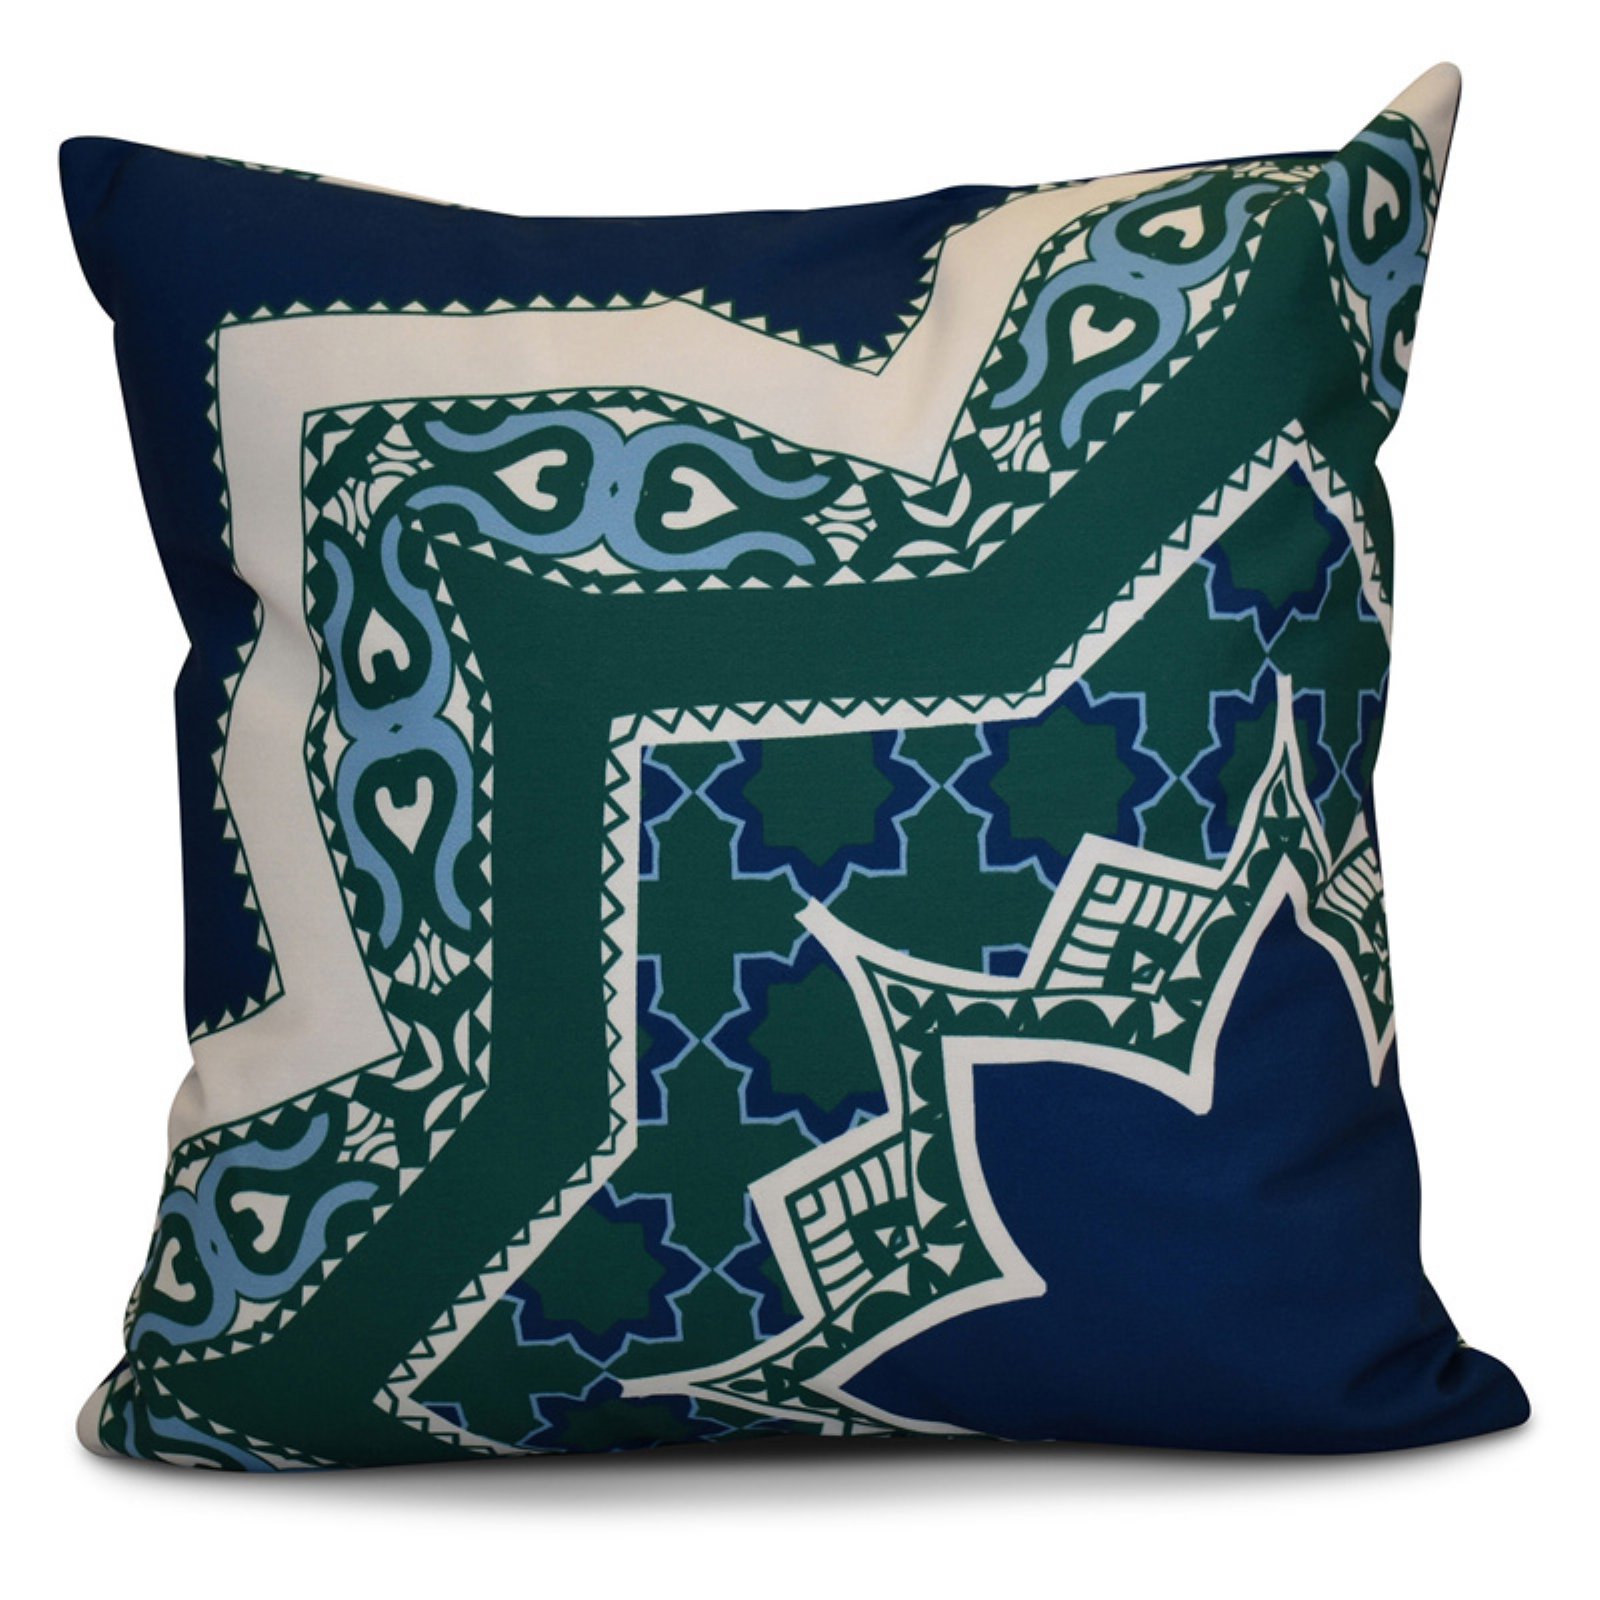 E by Design HH Revival Rising Star Print Outdoor Pillow - image 1 of 6